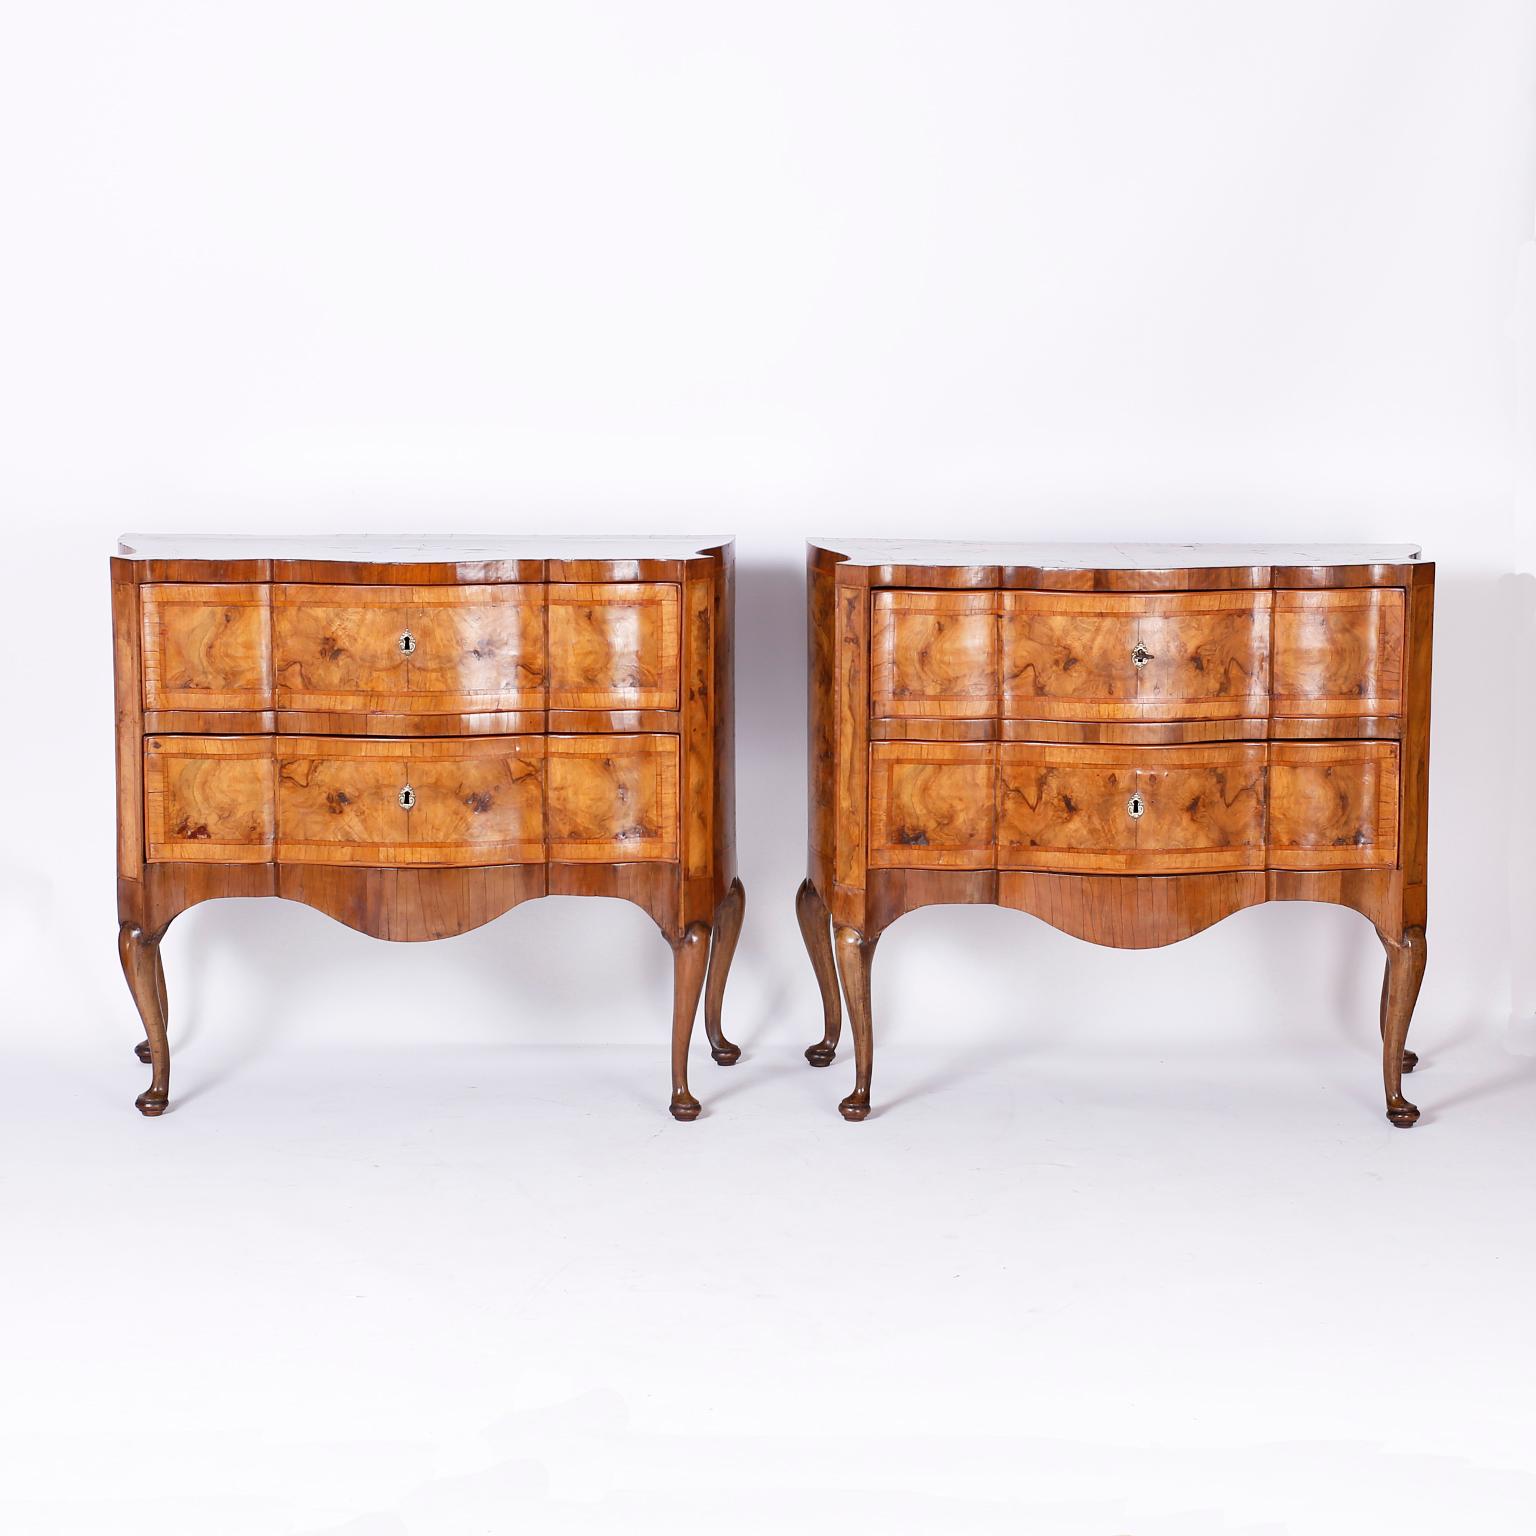 Rare pair of antique commodes crafted in walnut with dramatic burled wood grains and crossbanding. The fronts are scalloped, the sides serpentine, and the elegant cabriole legs terminate in pad feet.